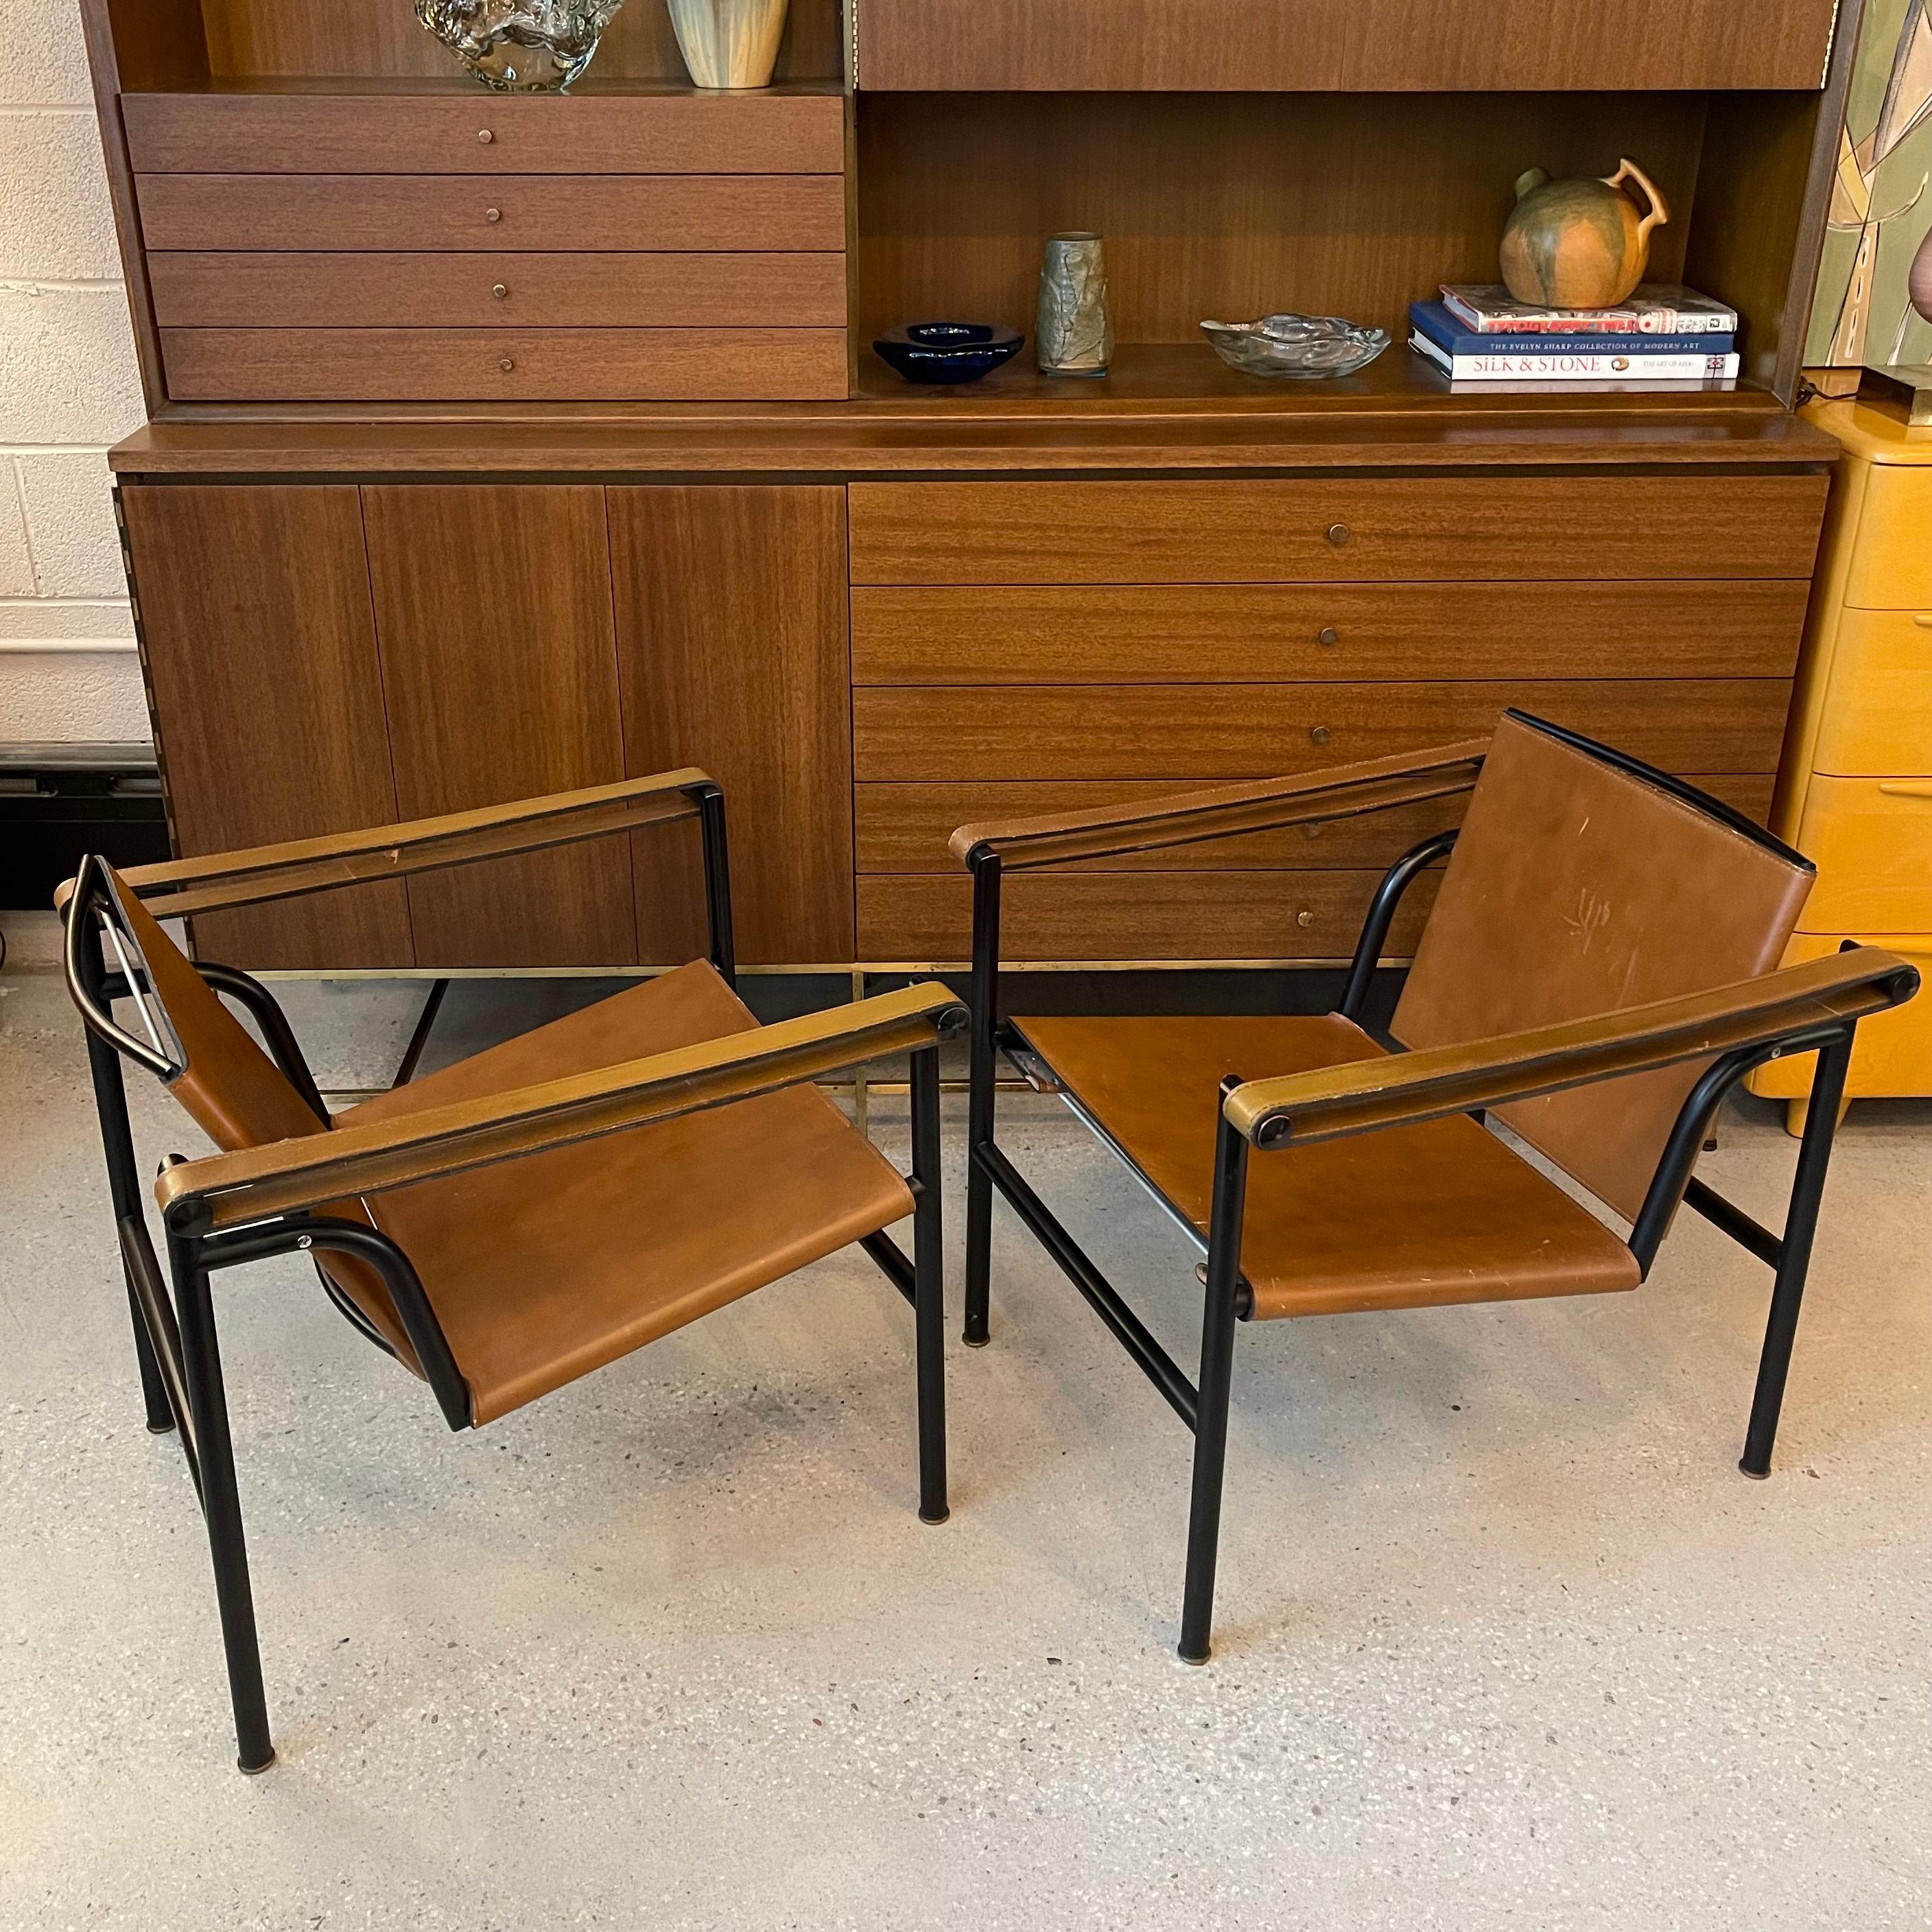 Pair of LC1, Basculant, sling armchairs designed by Le Corbusier, Pierre Jeanneret and Charlotte Perriand in 1928 and manufactured by Cassina, Italy in the 1970's. These iconic Bauhaus chairs feature low, sleek, black steel frames with luggage tan